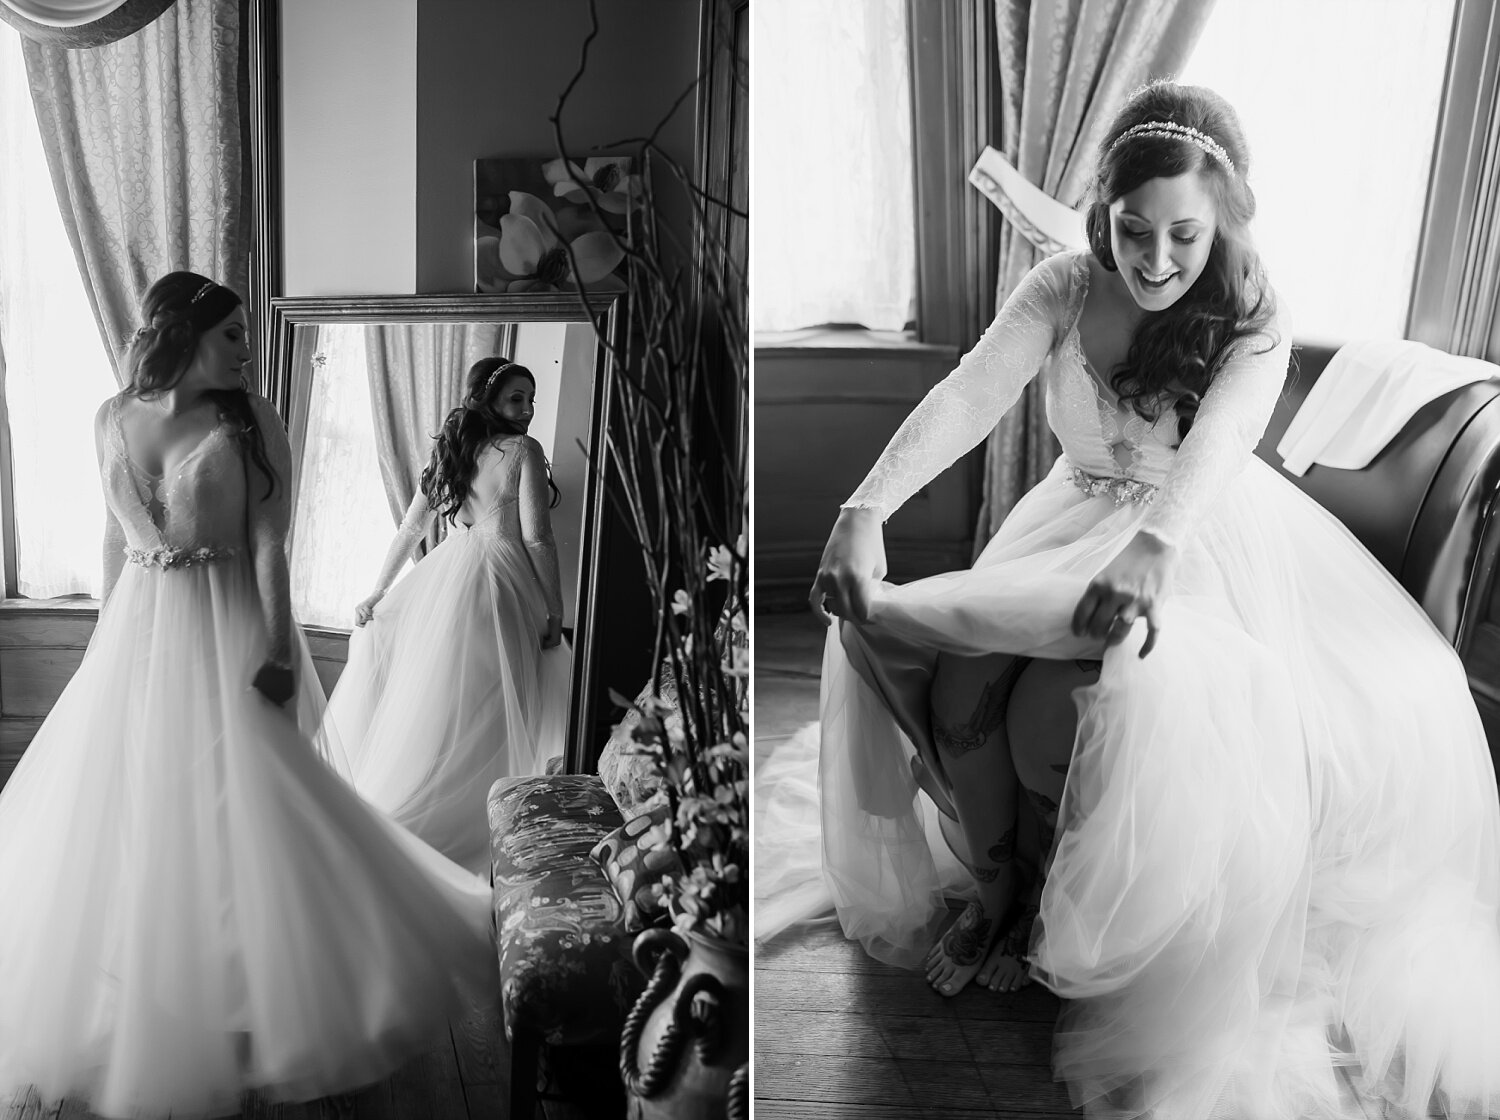  A bride wearing a light and whimsical wedding dress admires herself in the mirror at a mansion wedding venue.  